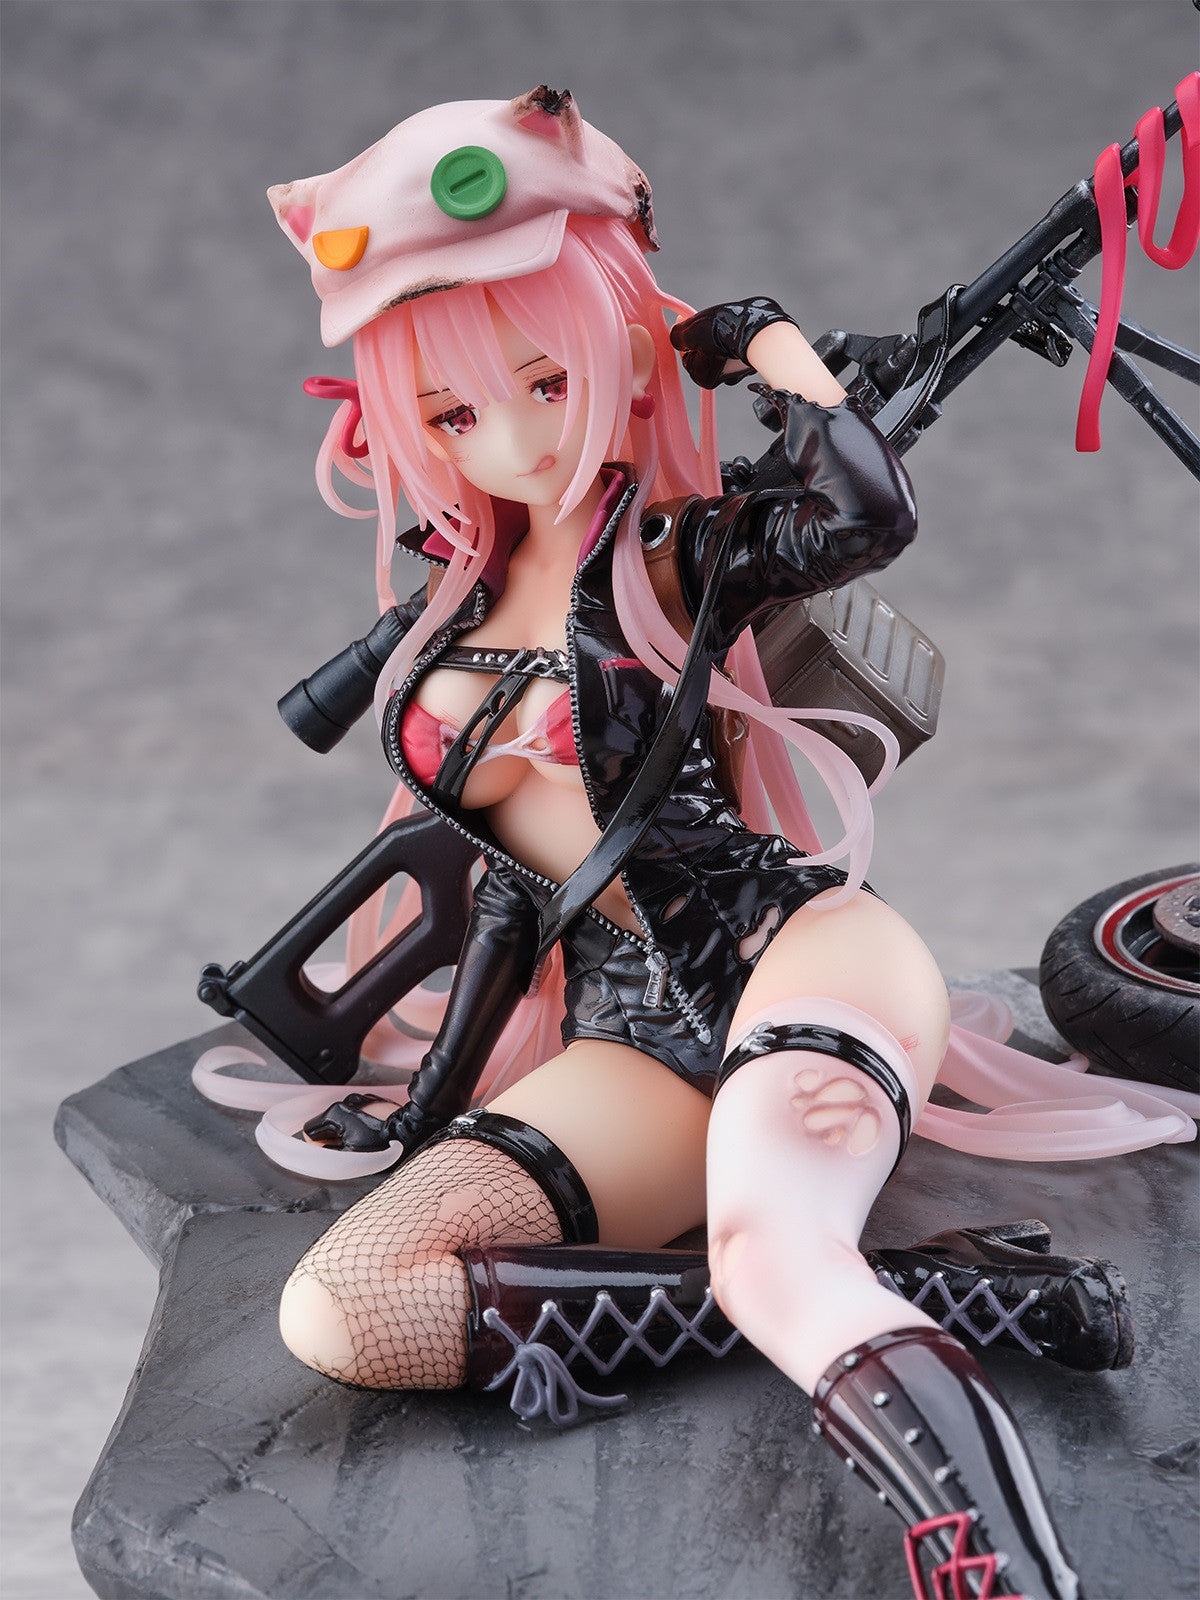 PRE ORDER Girls Frontline: 1/7 SCALE FIGURE - UKM-2000 with Lightning Speed (Heavy Damage Version)